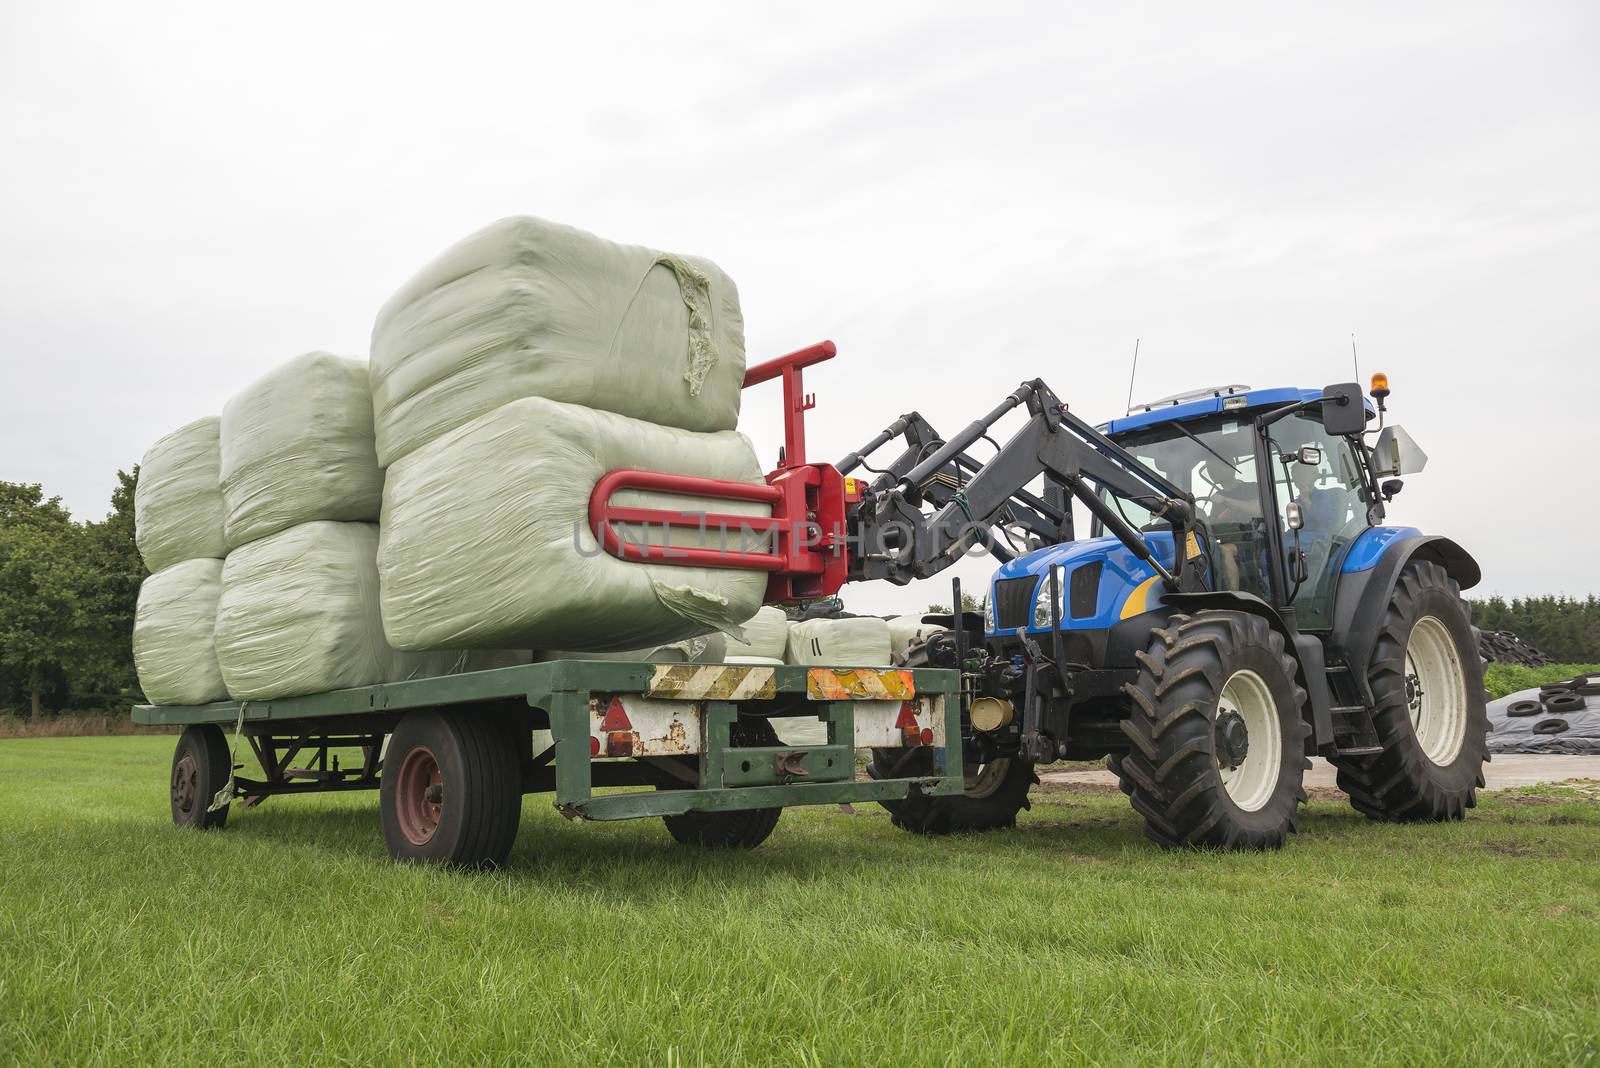 Loading plastic hay bales on a flat cart by a blue tractor
